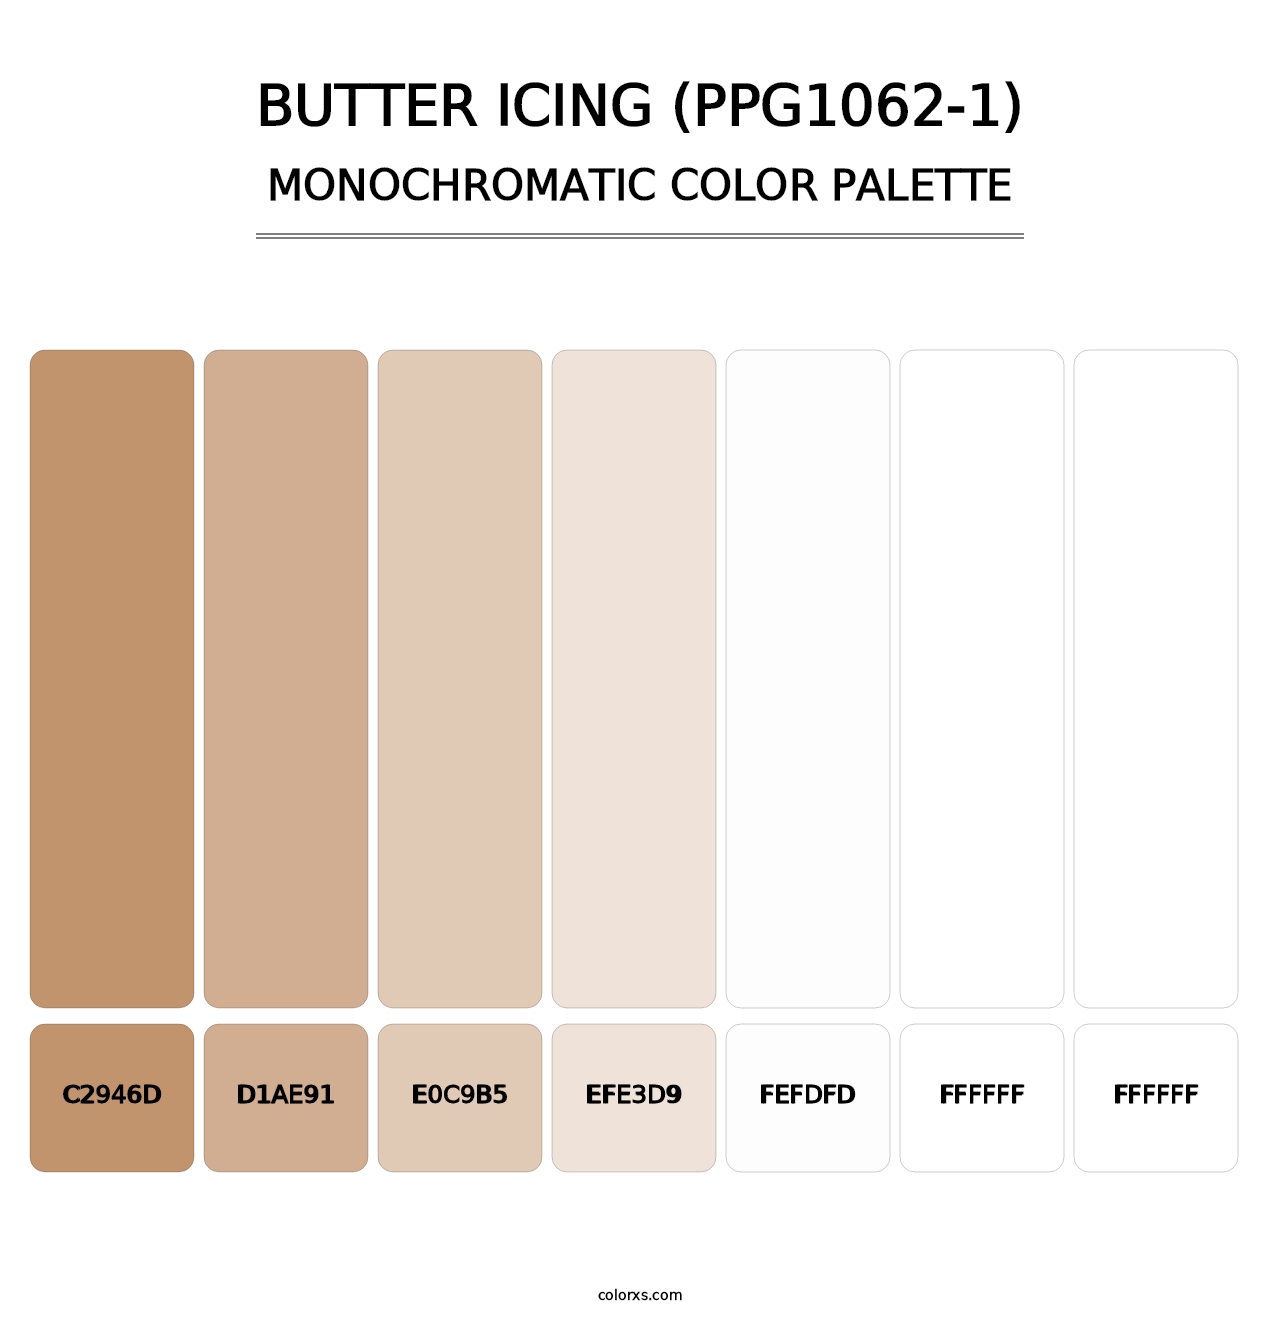 Butter Icing (PPG1062-1) - Monochromatic Color Palette